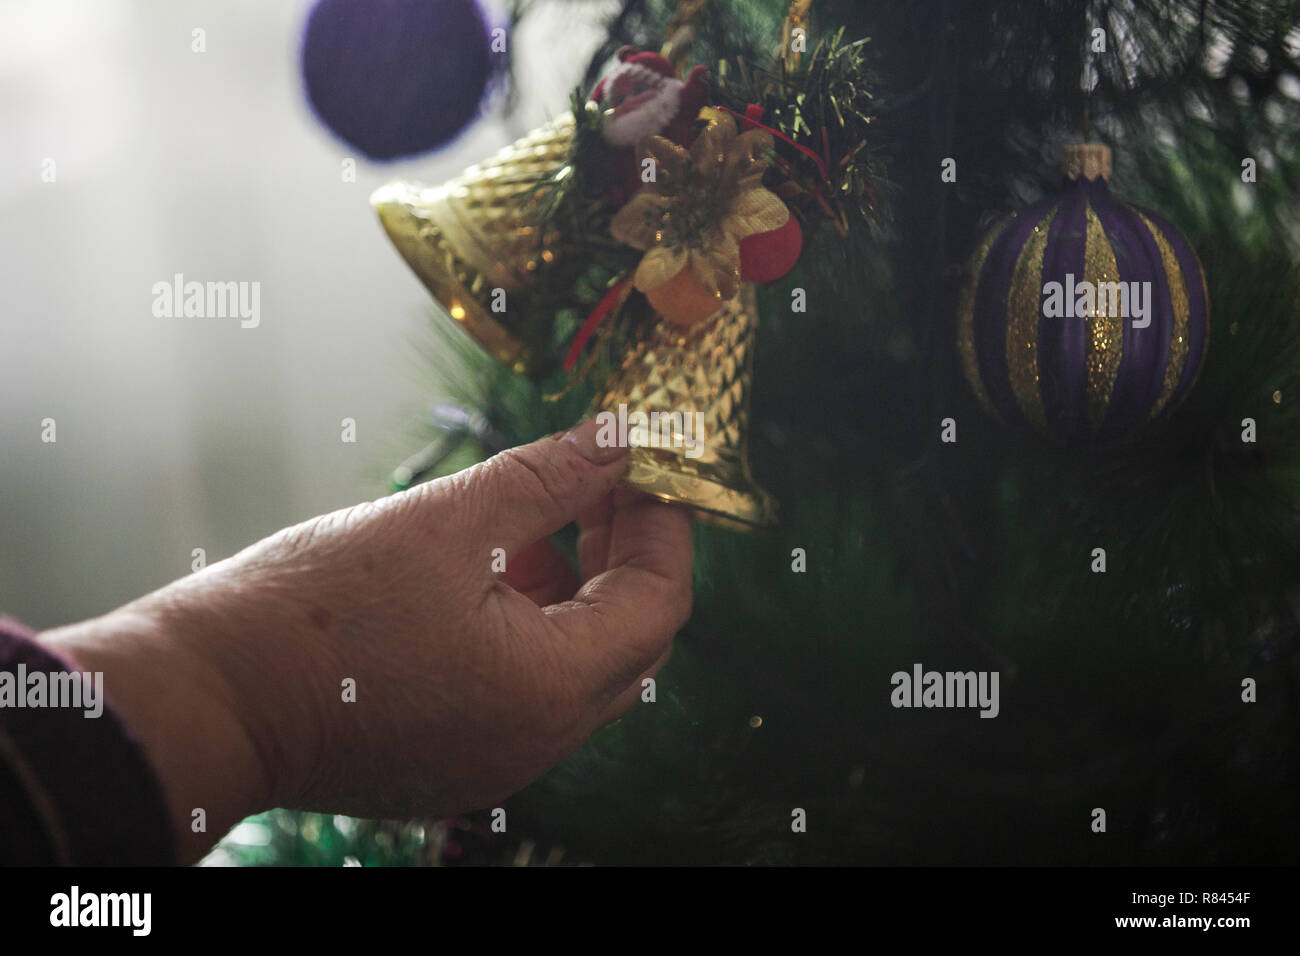 Hands of older woman decorating Christmas tree Stock Photo